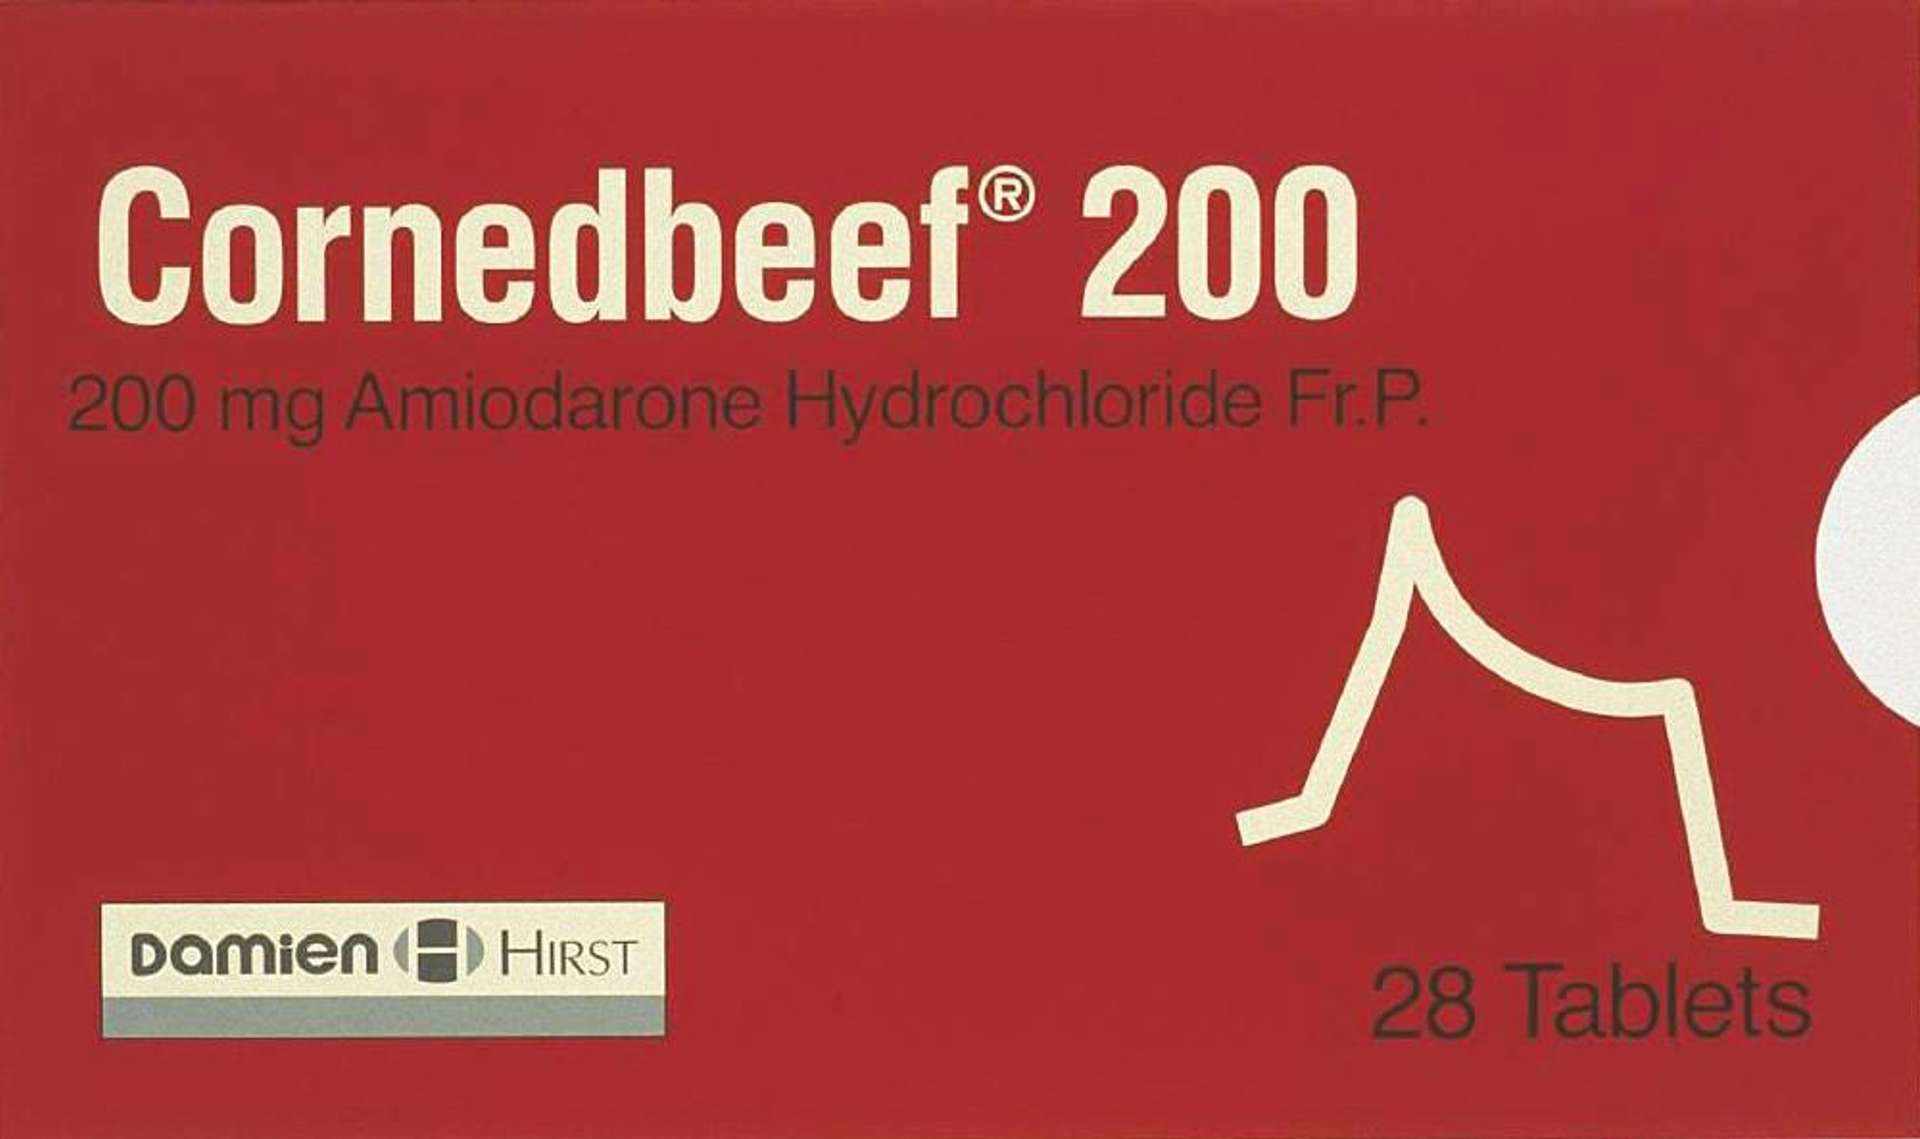 Damien Hirst’s Corned Beef. A screenprint of a red pharmaceutical box with the text “Cornedbeef ® 200”